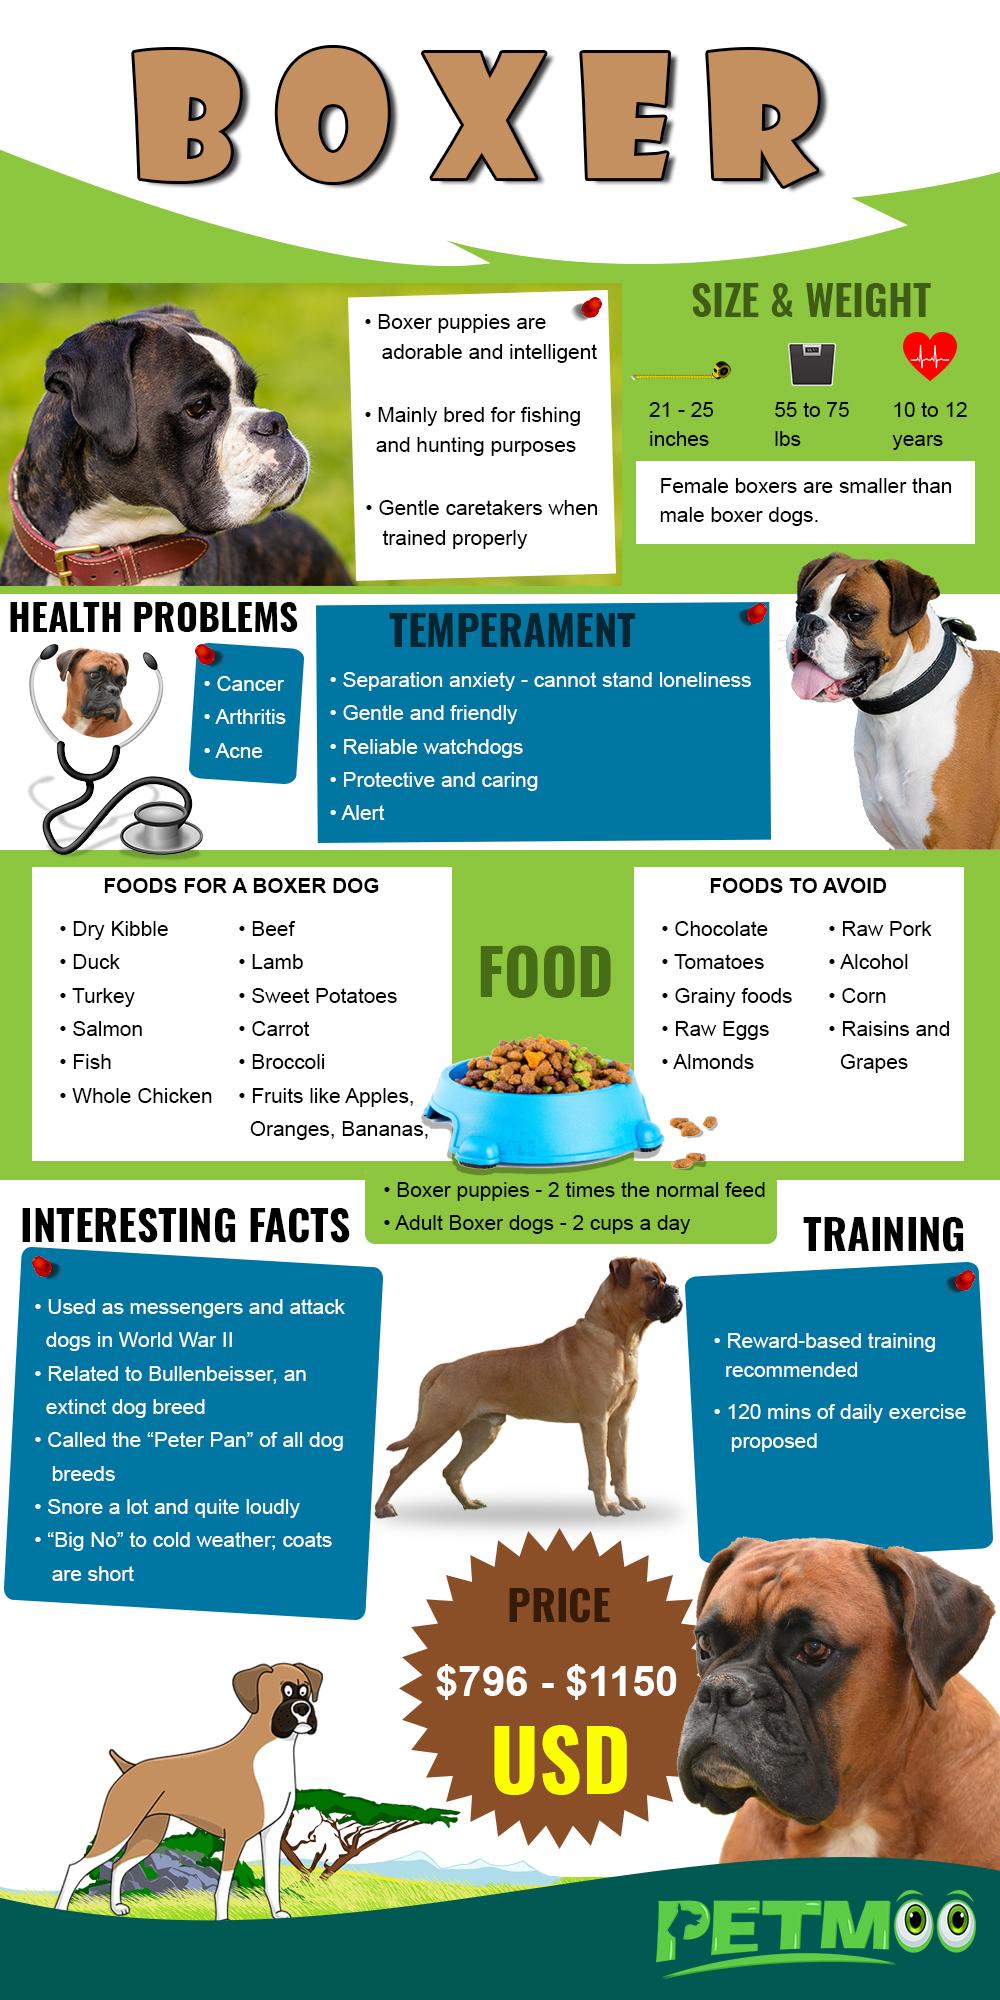 Boxer Puppies Dog Breed Information Guide Petmoo